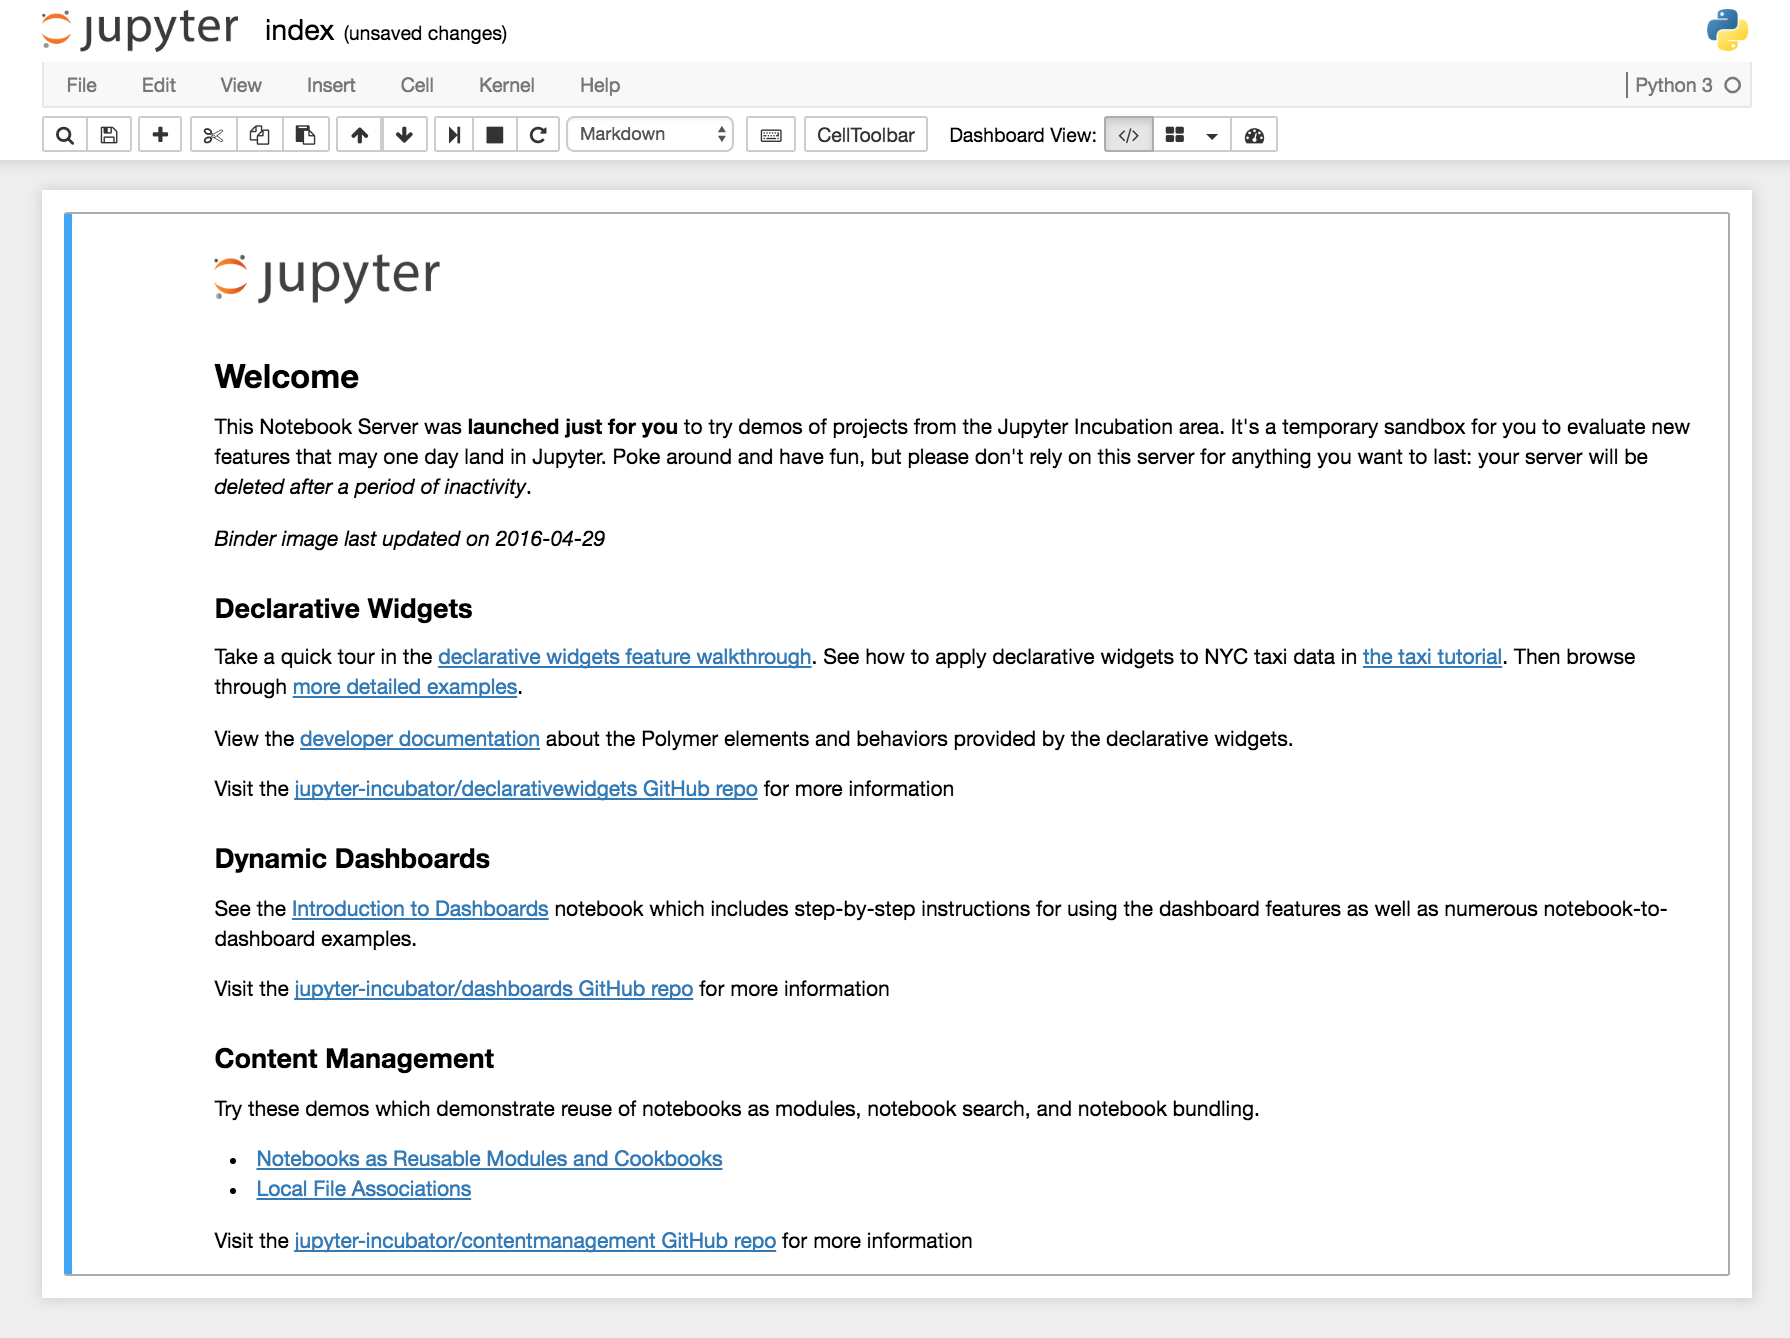 The online trial Jupyter notebook. It begins with a text cell stating that this is a temporary notebook server. It then lists the different incubator projects that are available on the server, with links to demos, documentation and GitHub repo for each.